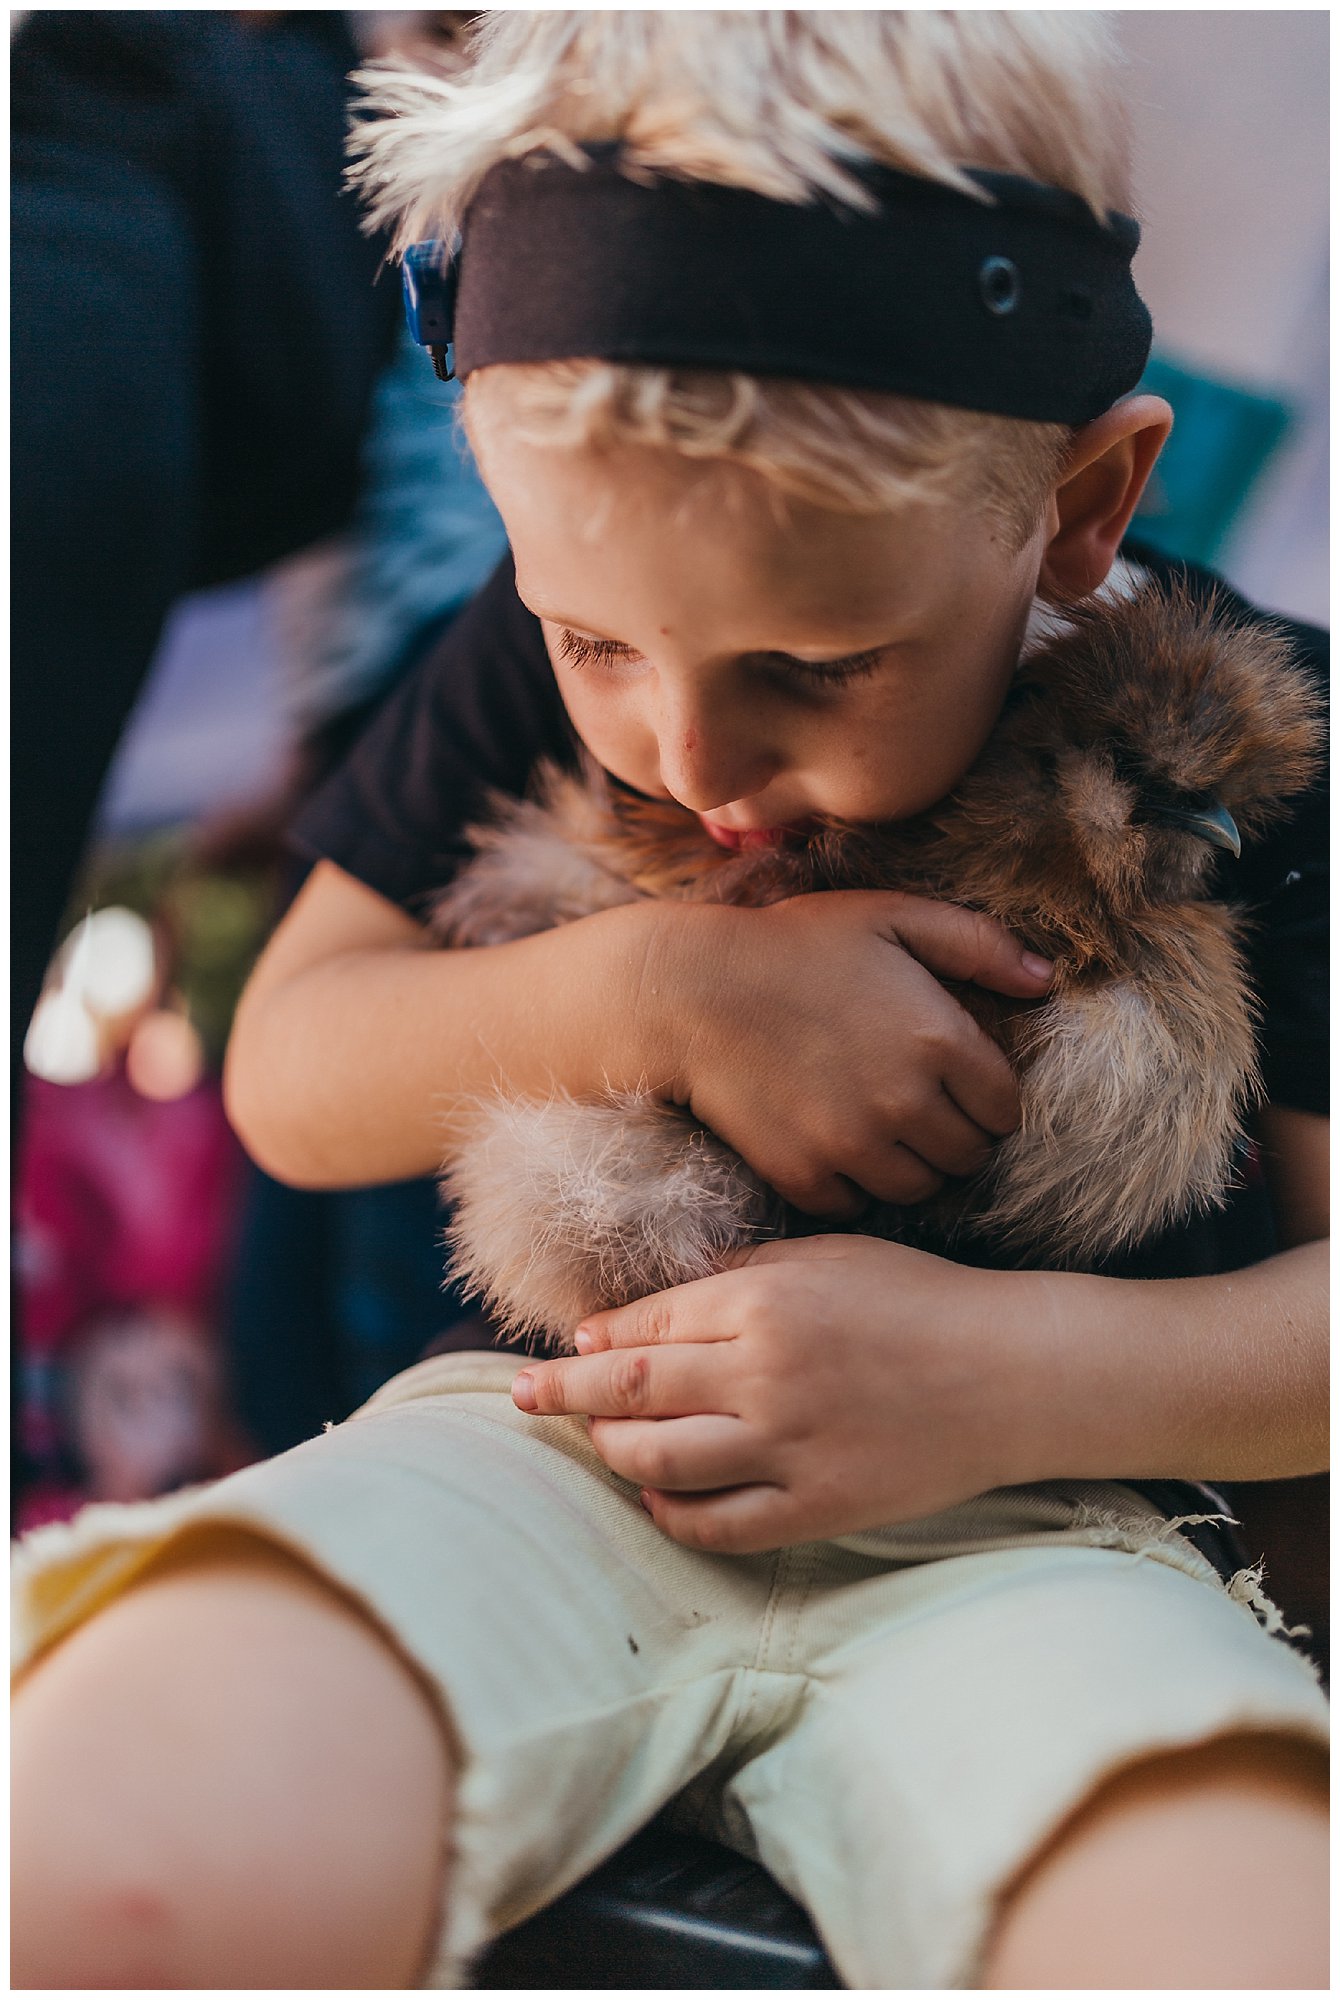 documentary-photography-kids-holding-chickens-gold-coast-show-2018